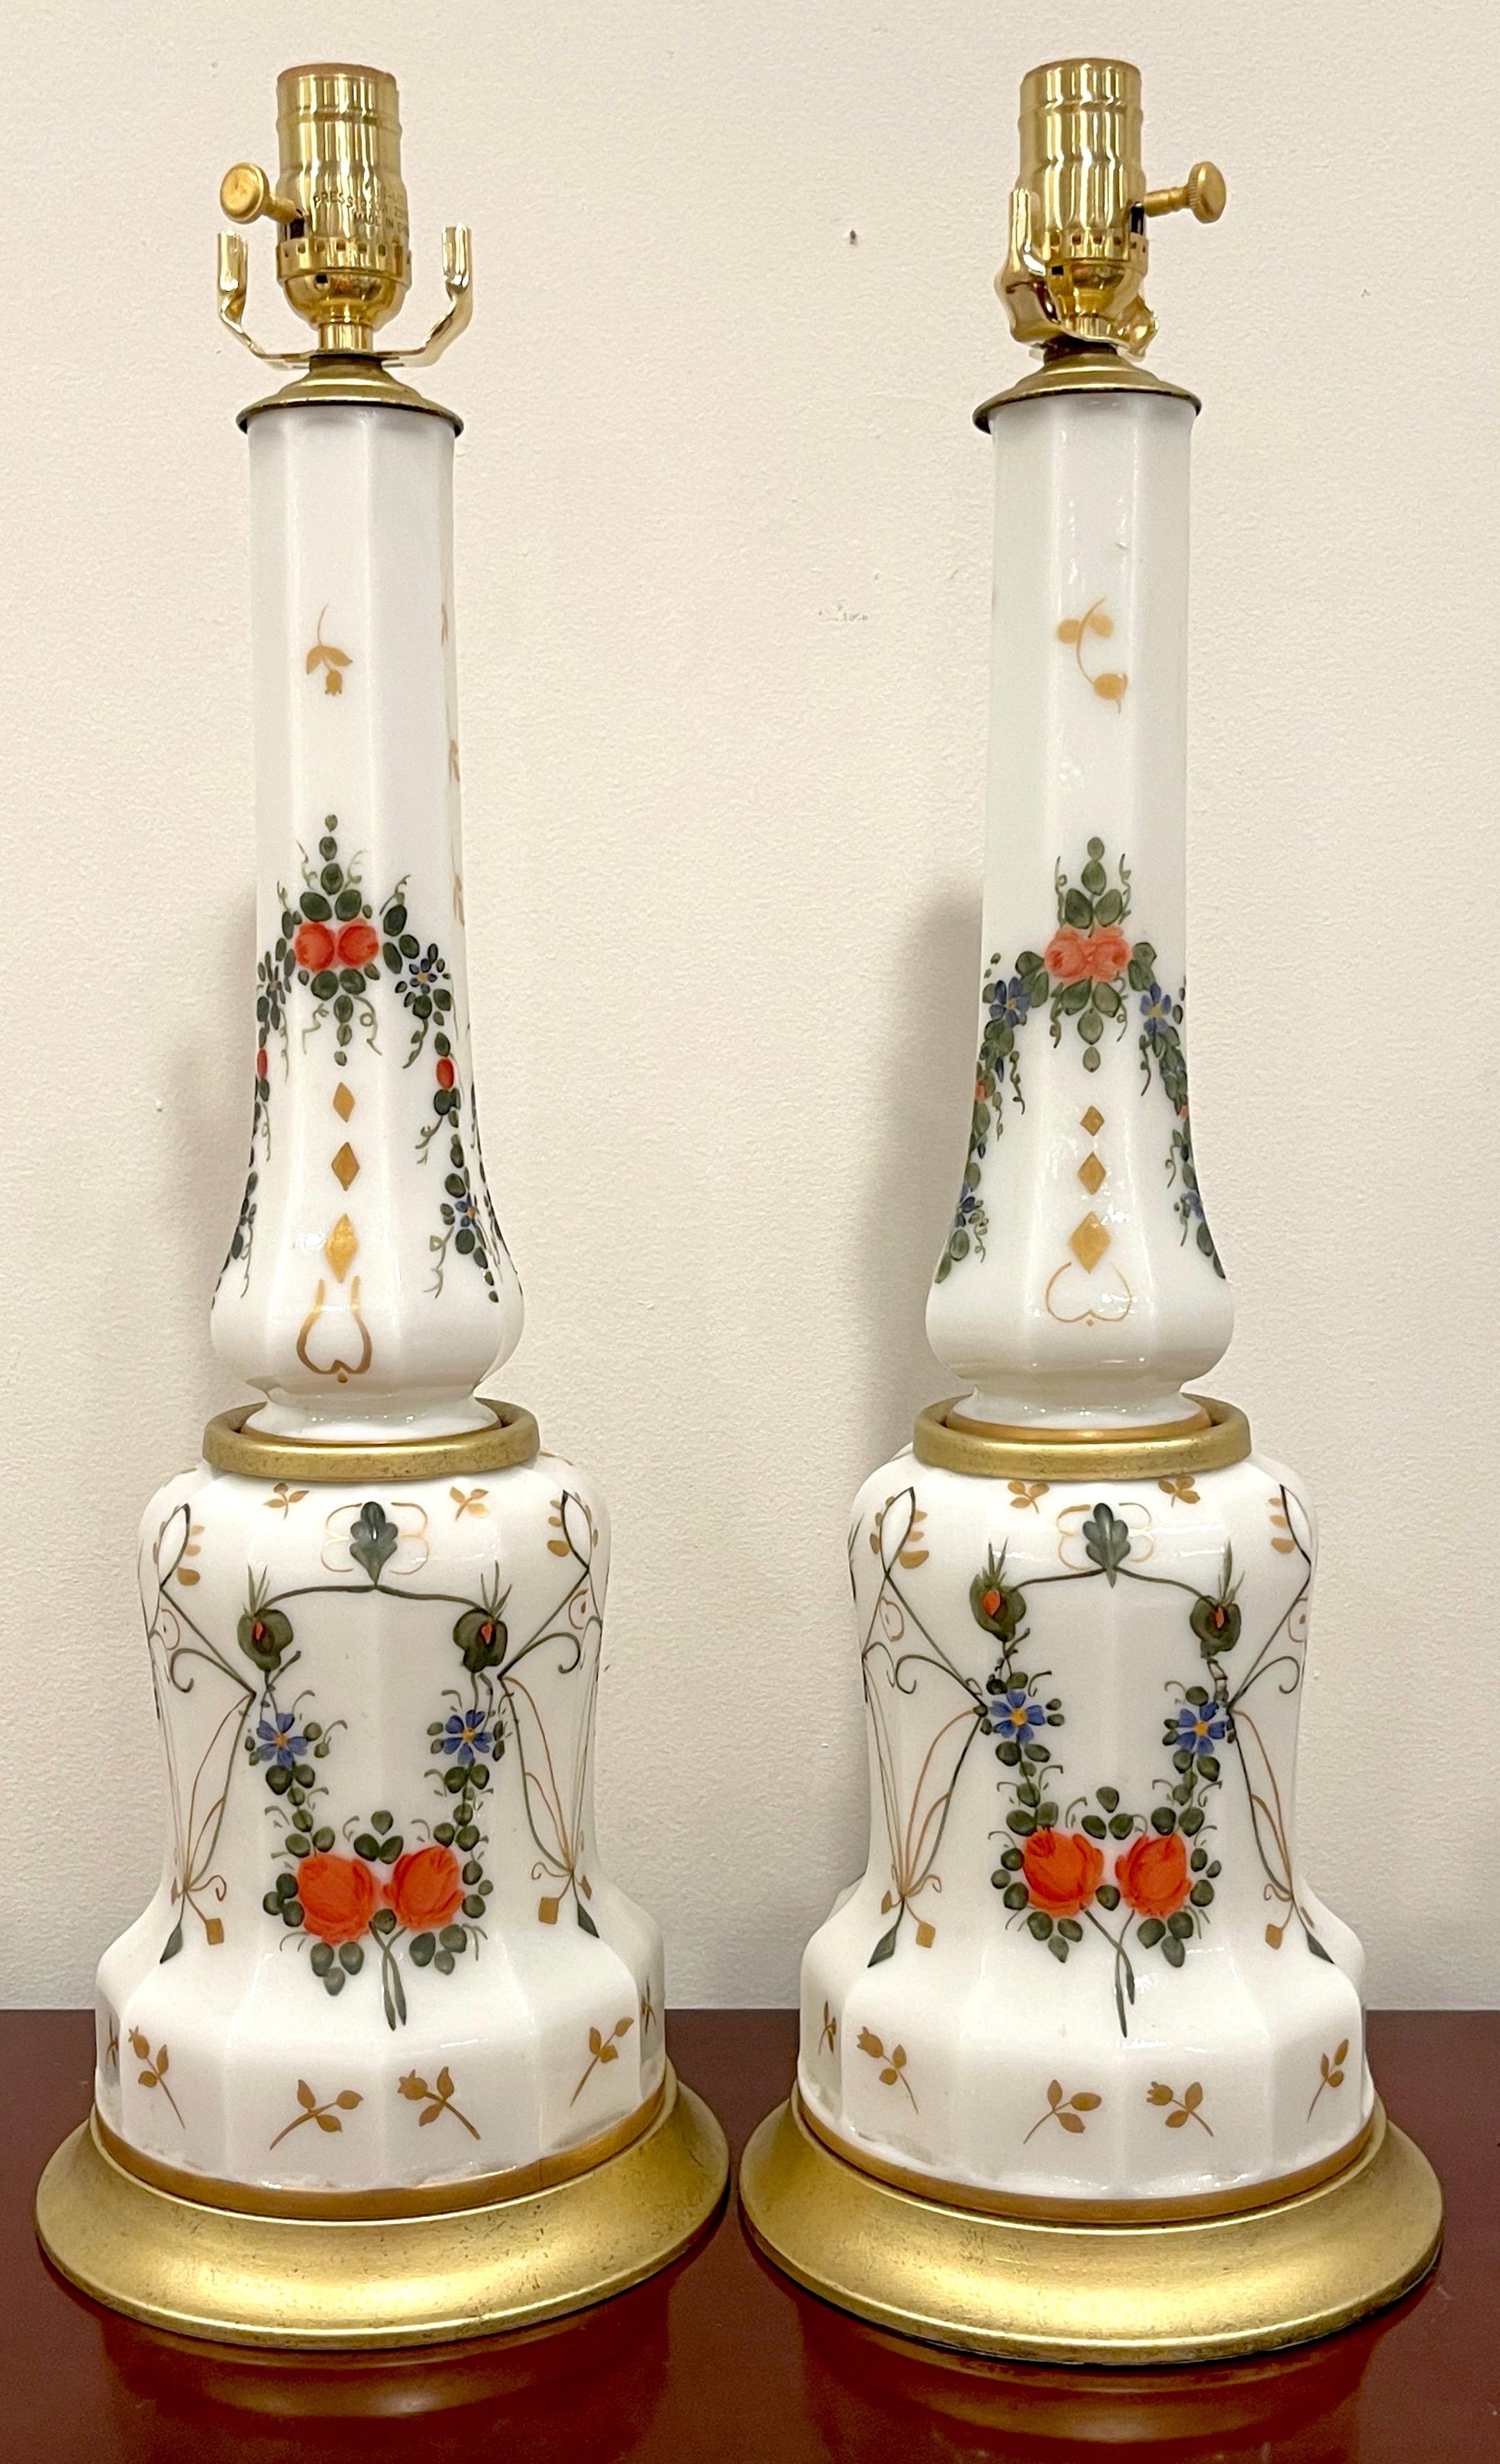 Pair of Italian Neoclassical Floral Enameled Opaline Glass Column Lamps 
Italy, Circa 1960s

Pair of Italian Neoclassical floral enameled opaline glass column lamps, originating from the 1960s. These stunning lamps consist of two-section columns,